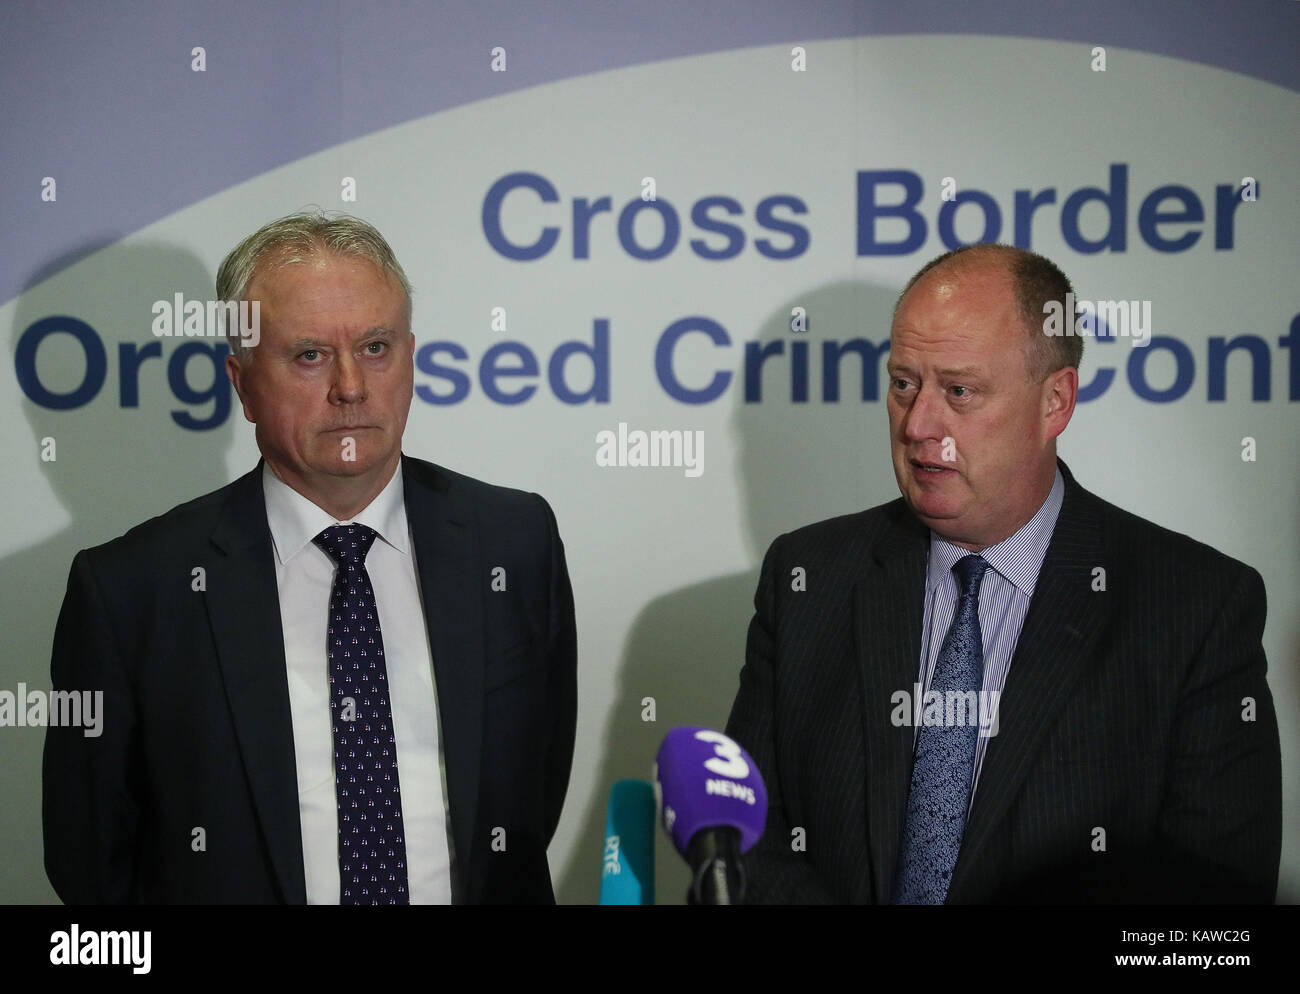 Acting Garda Commissioner Donal O Culain (left) and PSNI Chief Constable George Hamilton speaking to the media during the Cross-border conference on organised crime at the Crowne Plaza Hotel, Dundalk. Stock Photo